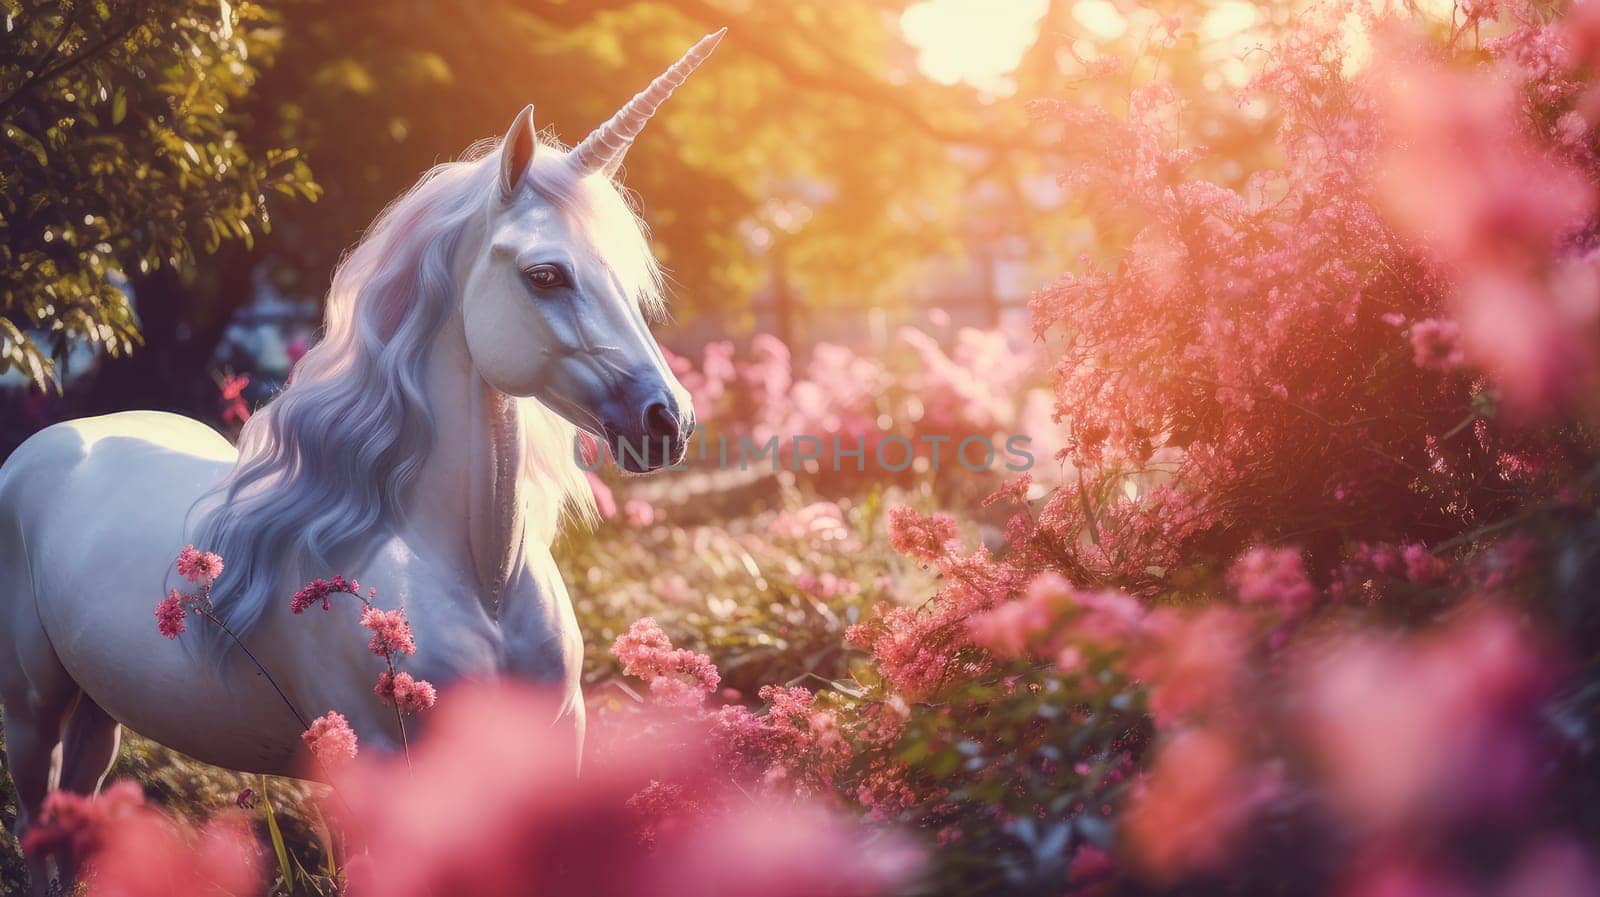 Fairytale unicorn in a field with flowers in pink. Environmental protection, the problem of ocean and nature pollution. Advertising for a travel agency, pet store, veterinary clinic, phone screensaver, beautiful pictures, puzzles